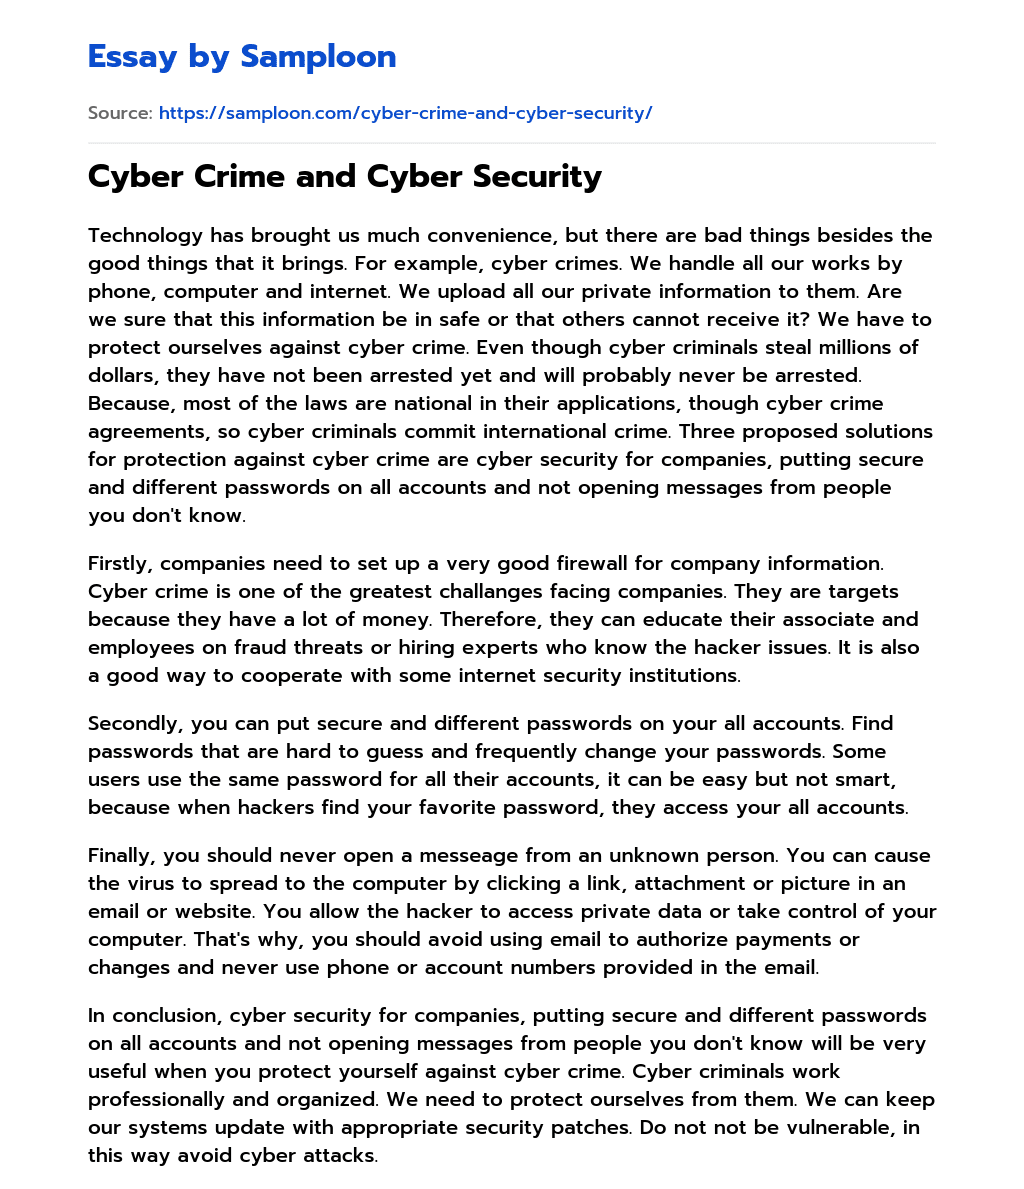 Cyber Crime and Cyber Security essay